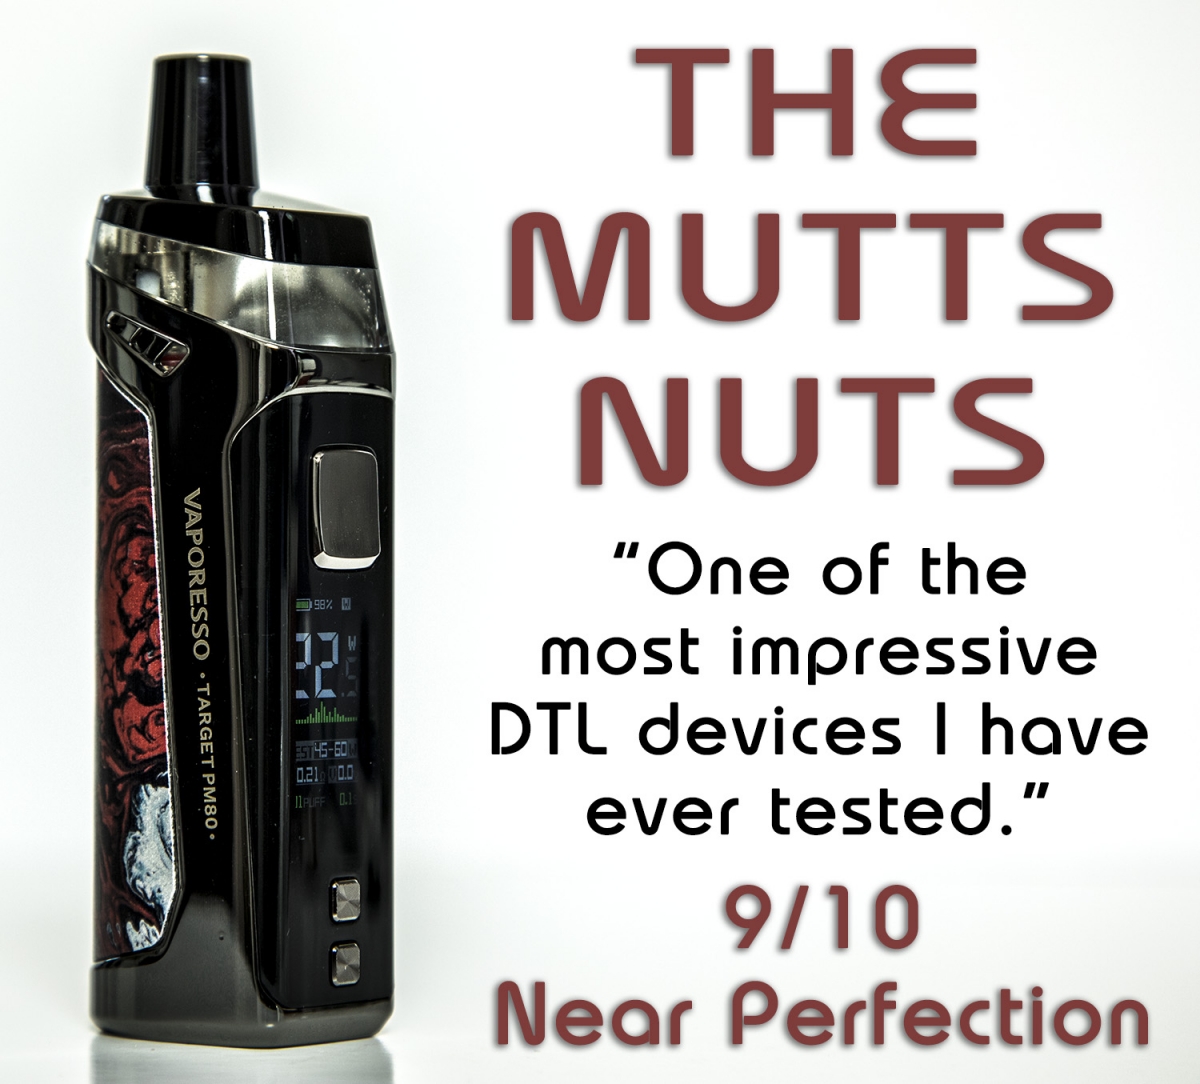 Vaporesso Target PM80 Kit mutts nuts